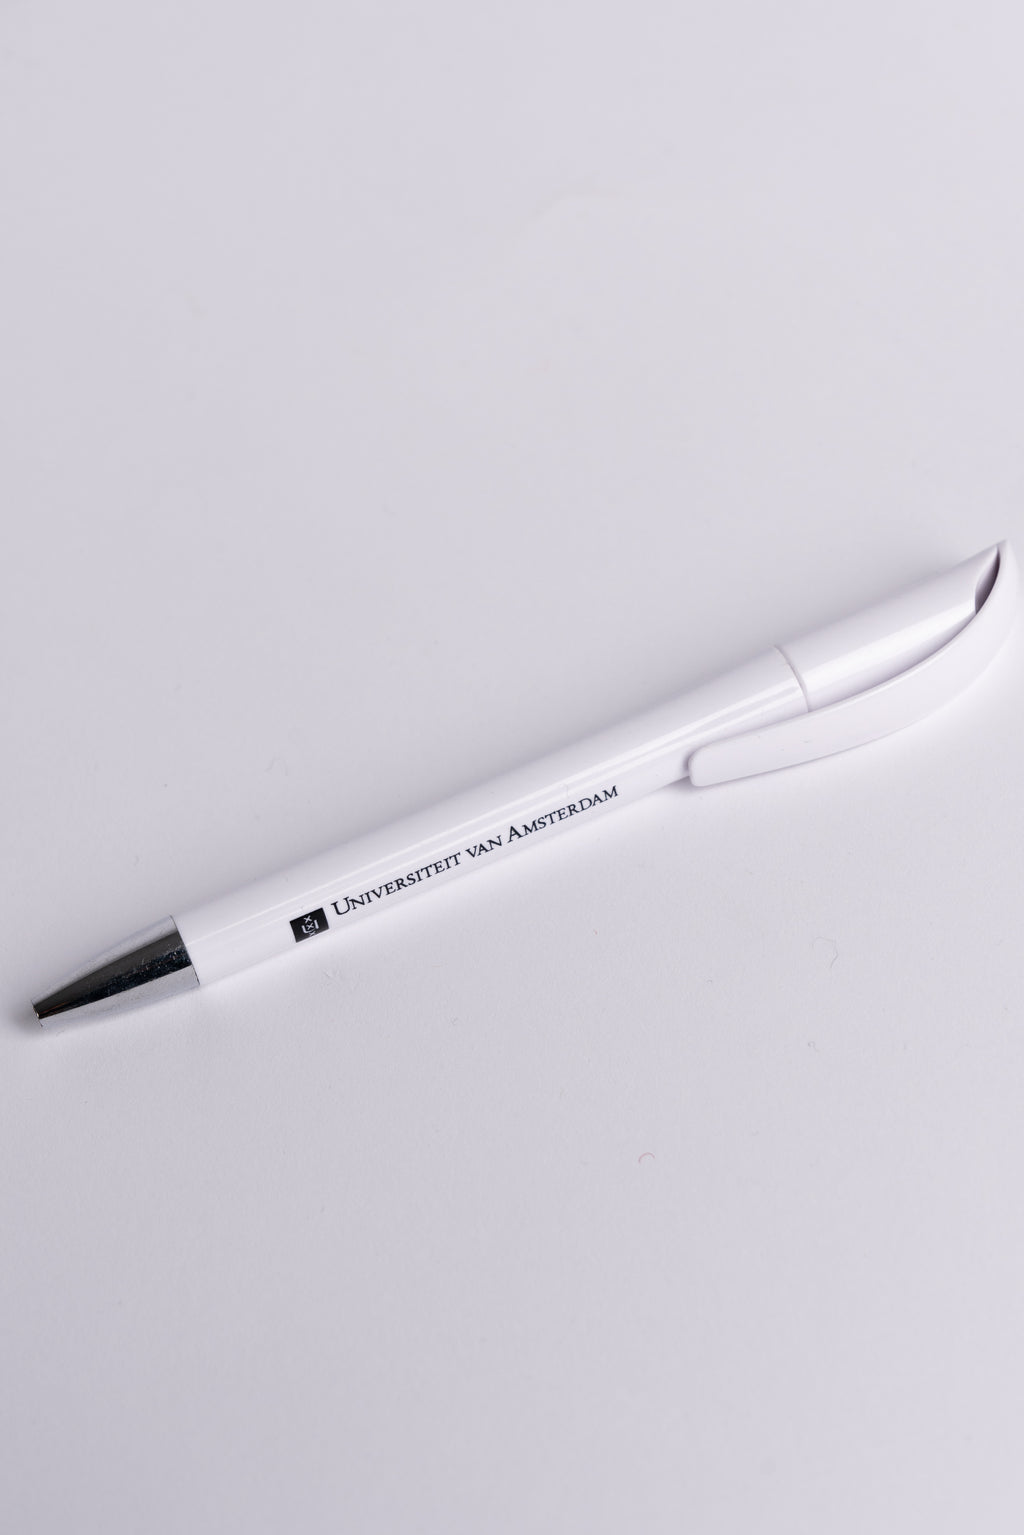 Pen with the University of Amsterdam logo in different colors